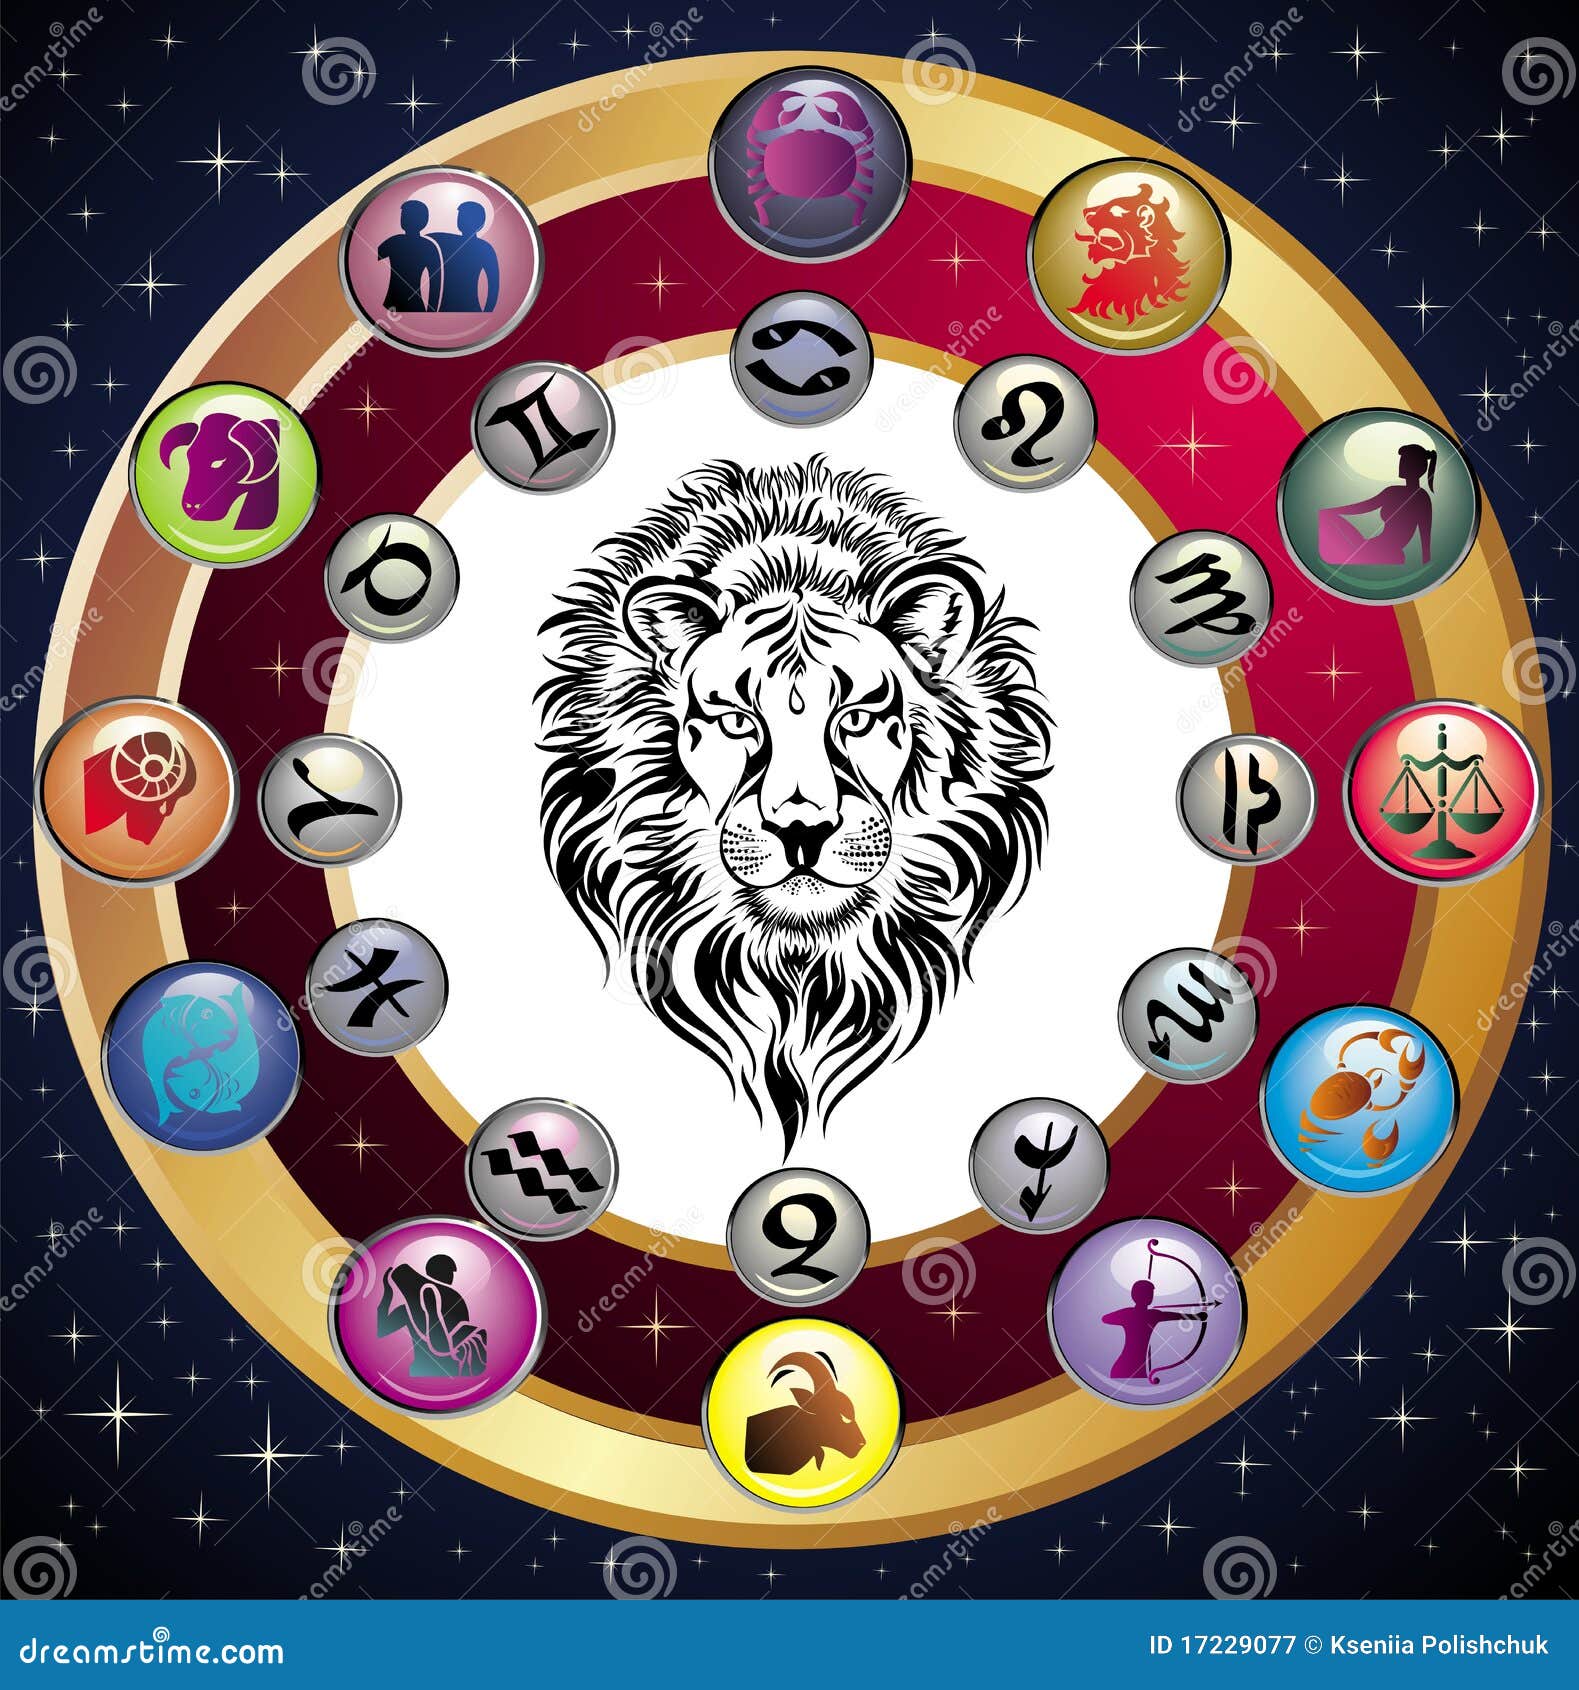 Zodiac Wheel With Sign Of Leo. Royalty Free Stock Photography - Image